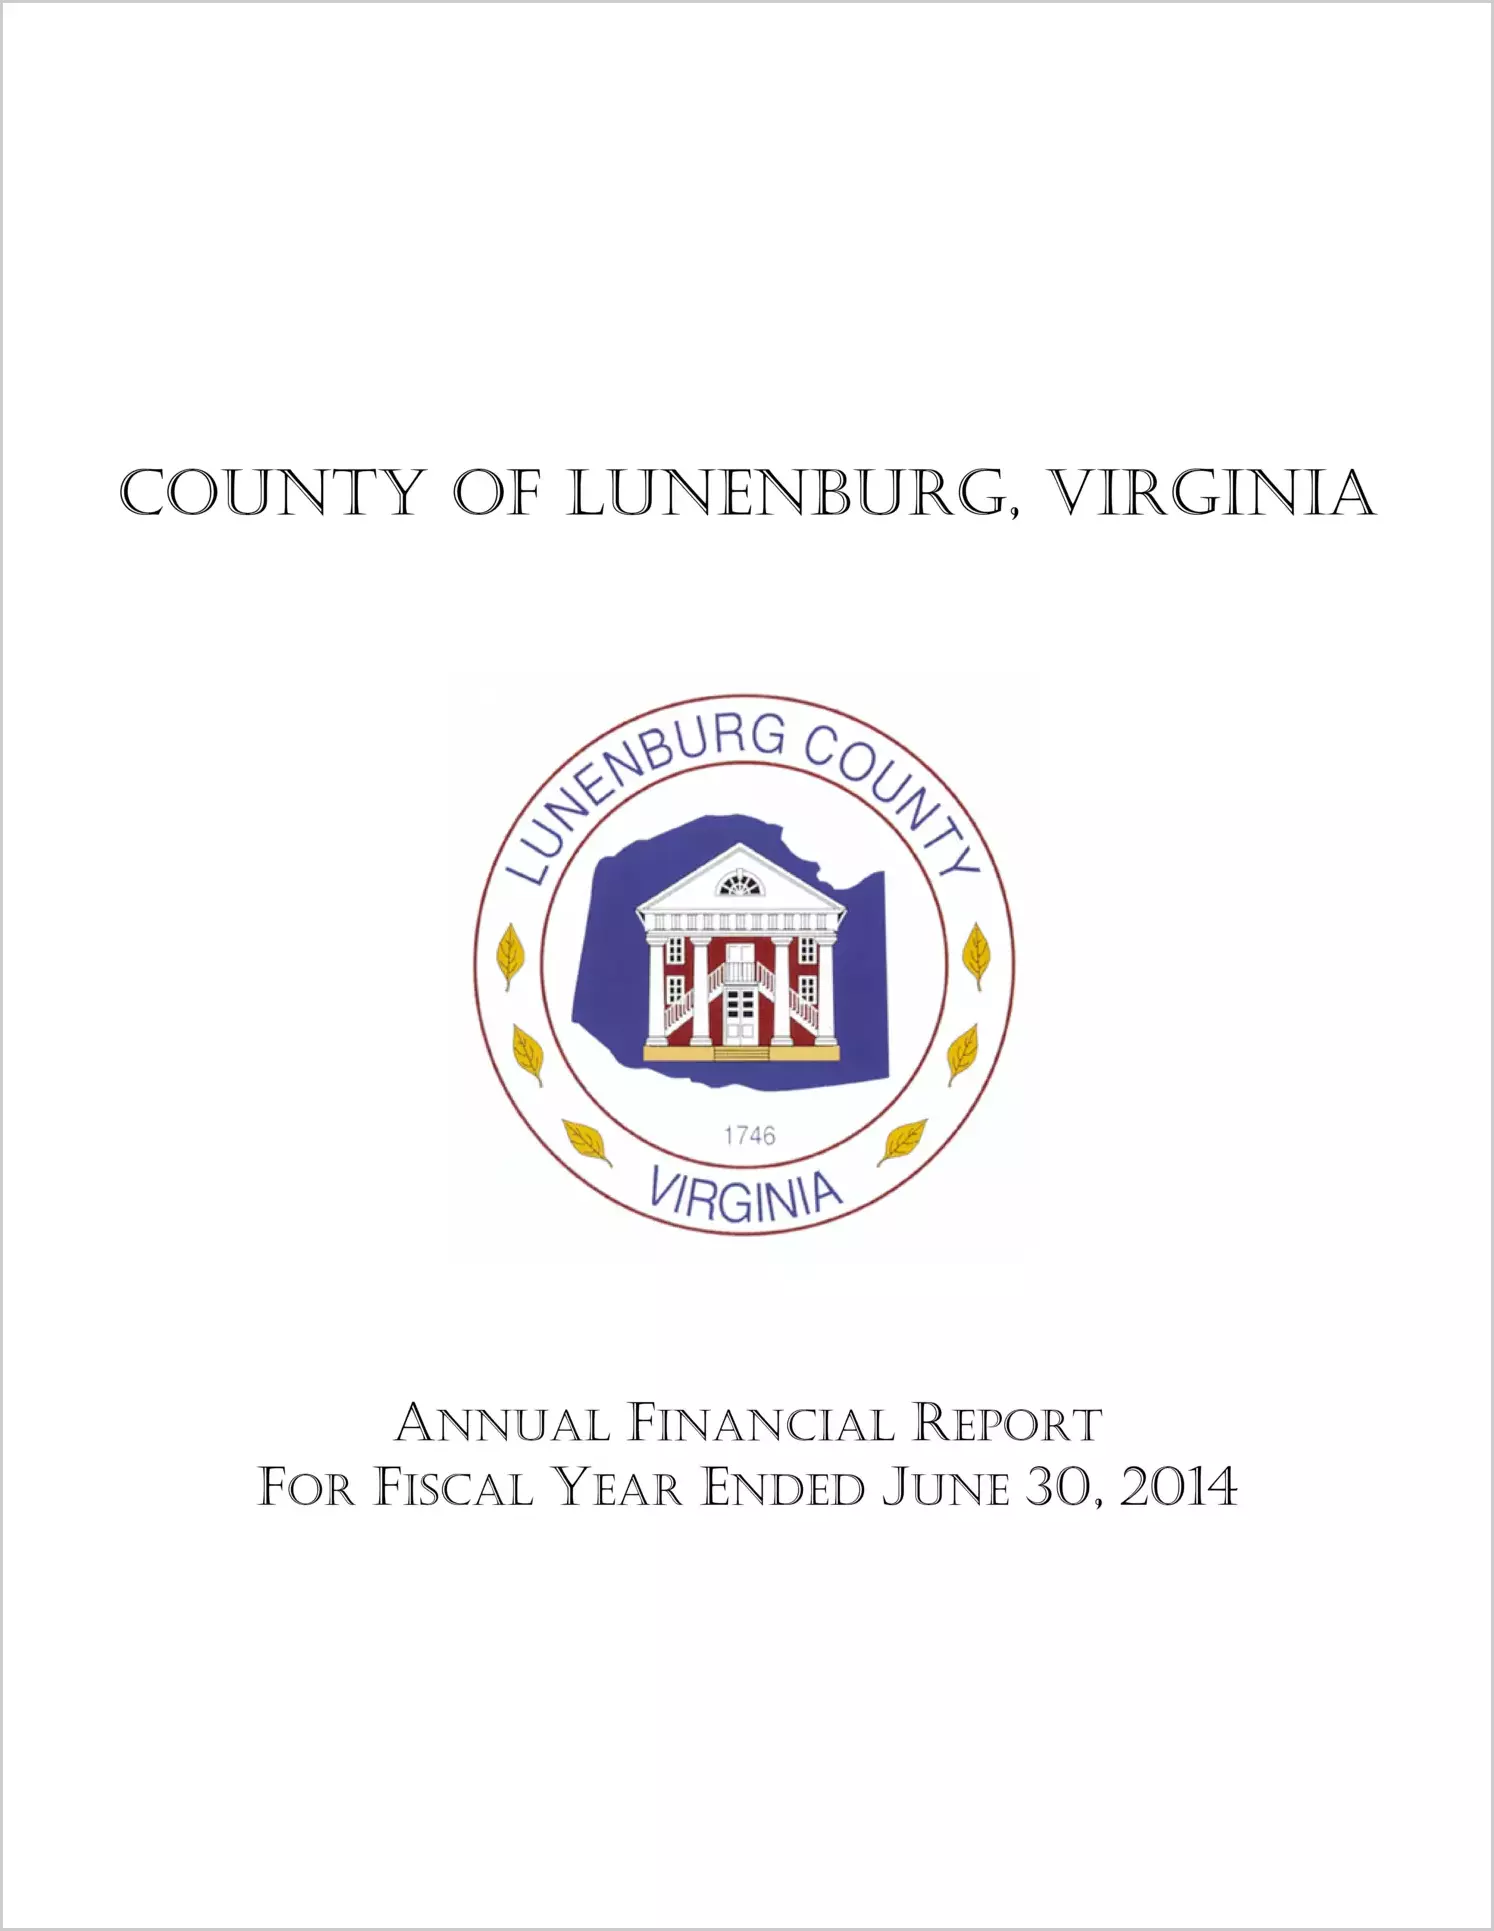 2014 Annual Financial Report for County of Lunenburg